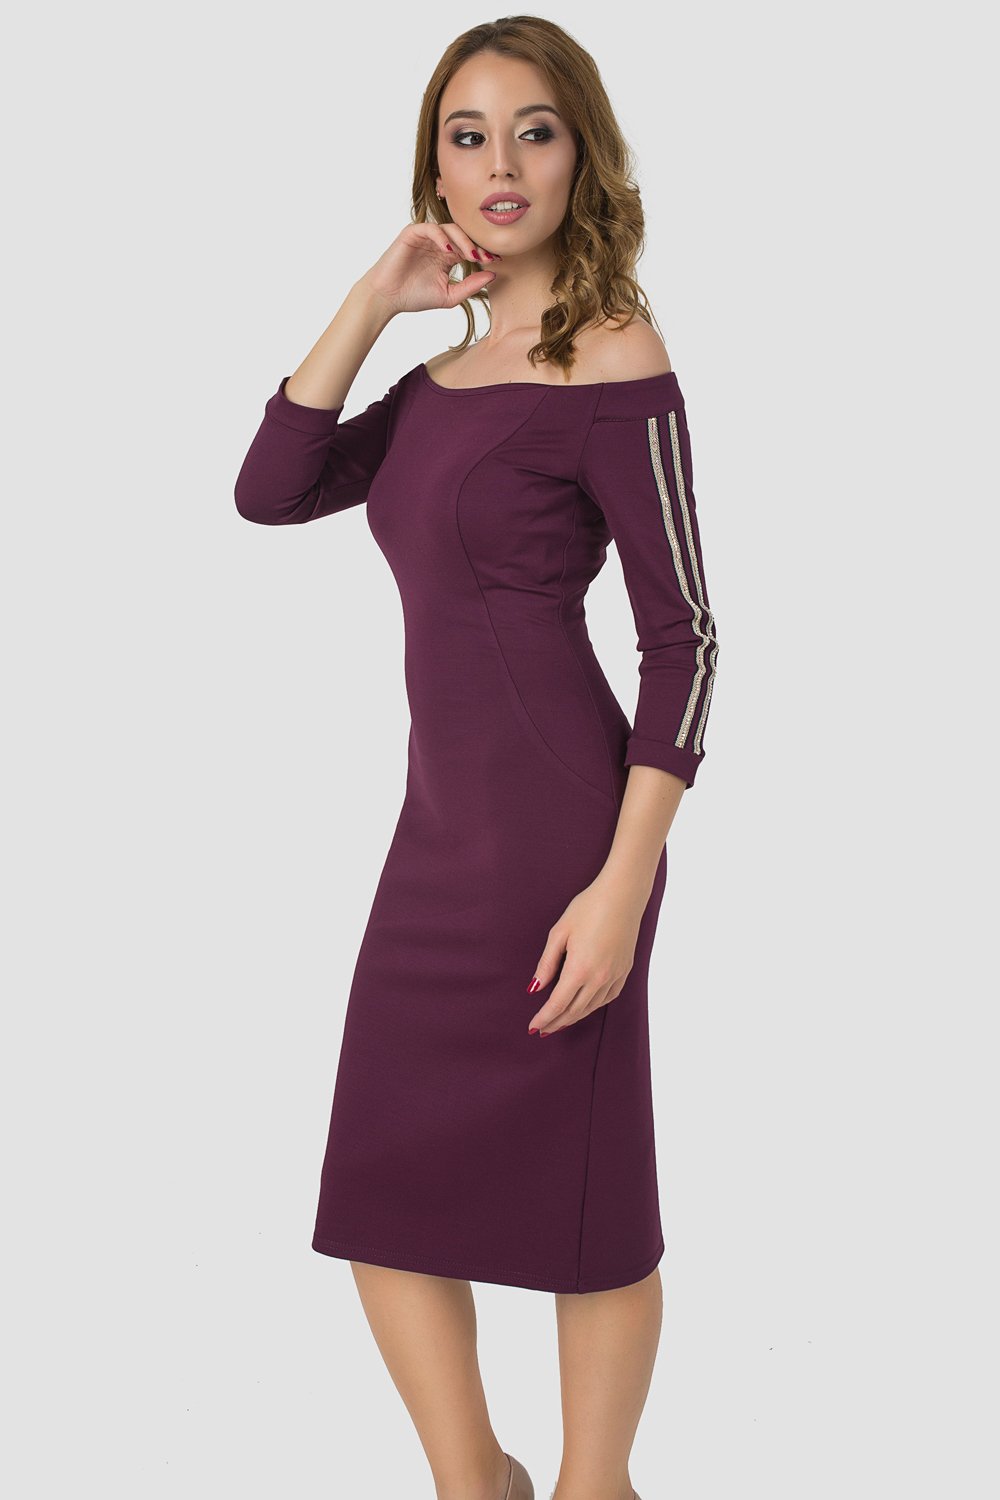 Dress with open shoulders in aubergine colour